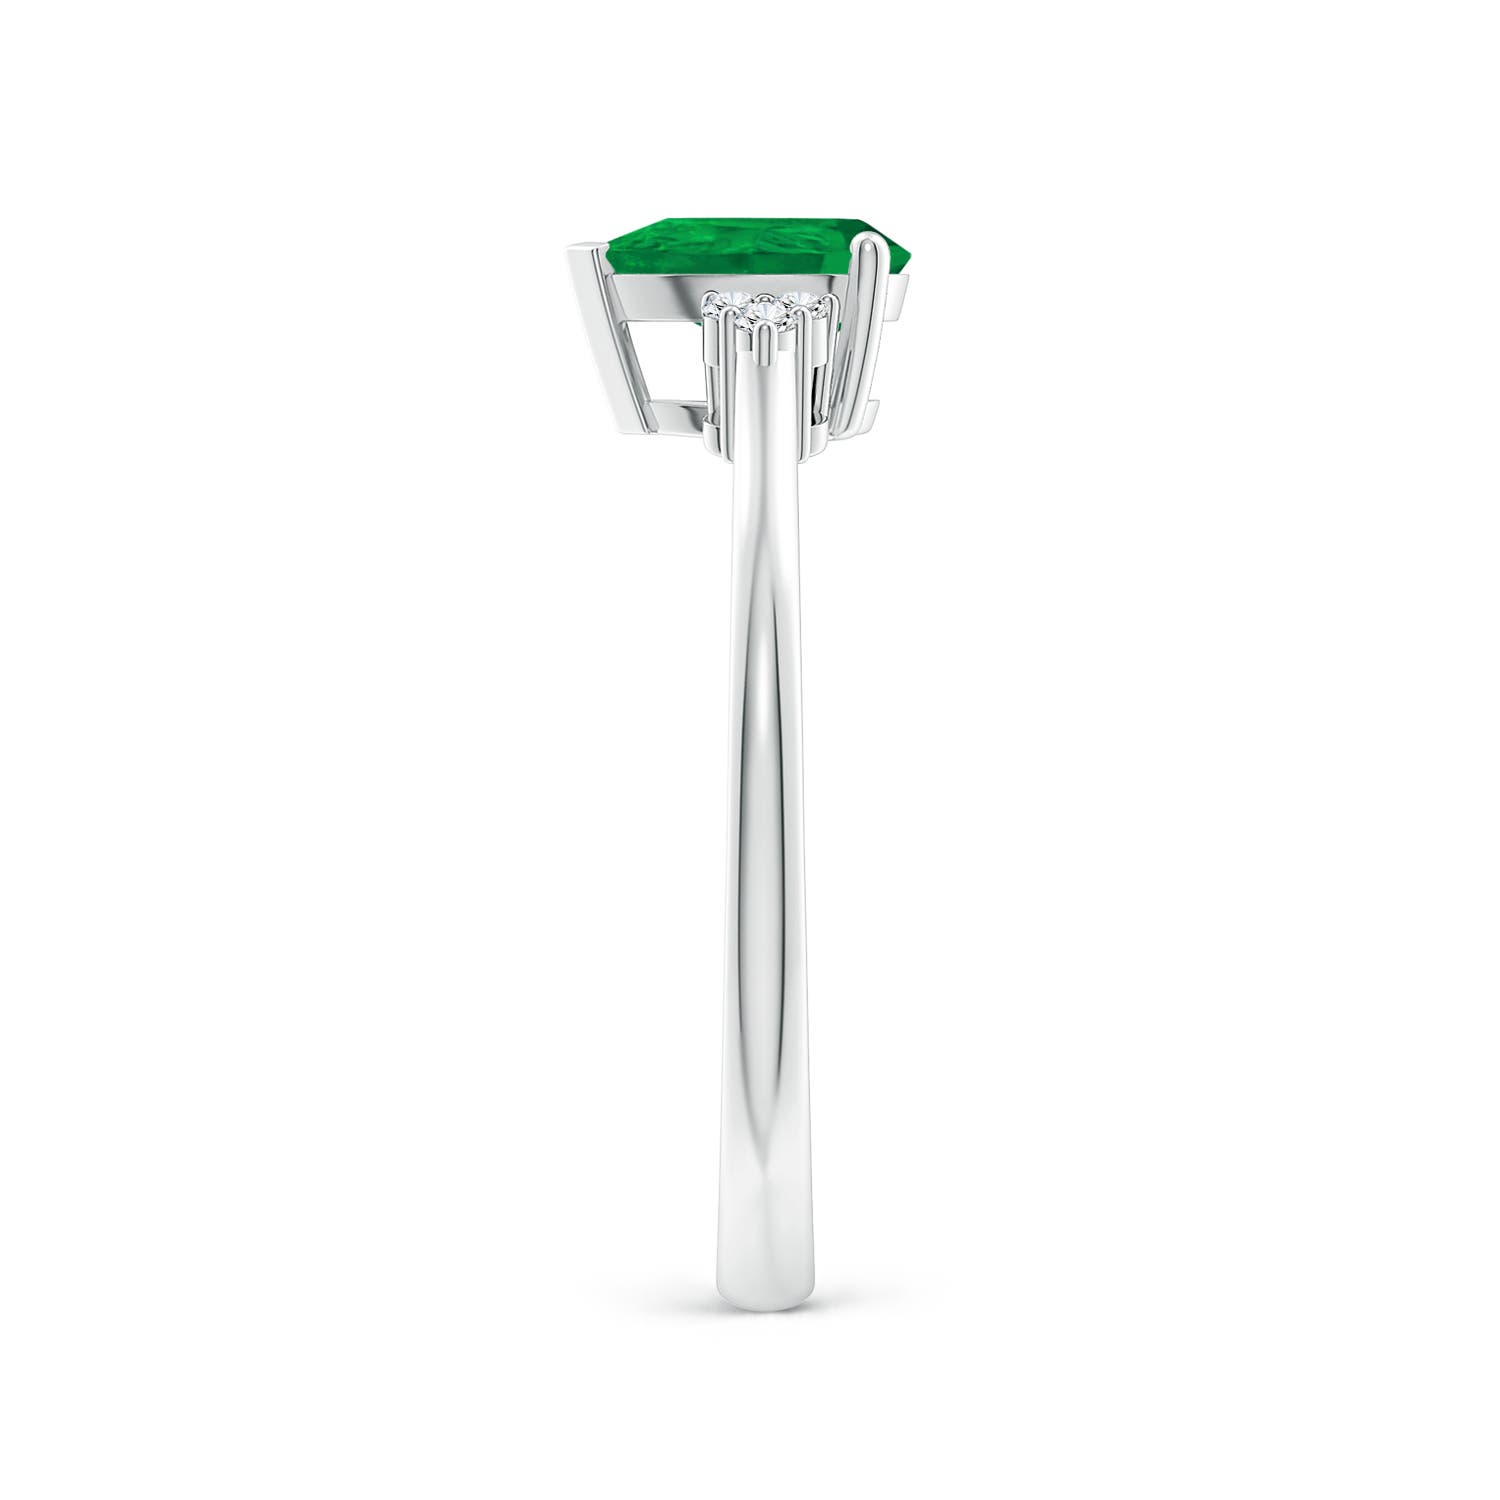 AA - Emerald / 0.66 CT / 14 KT White Gold